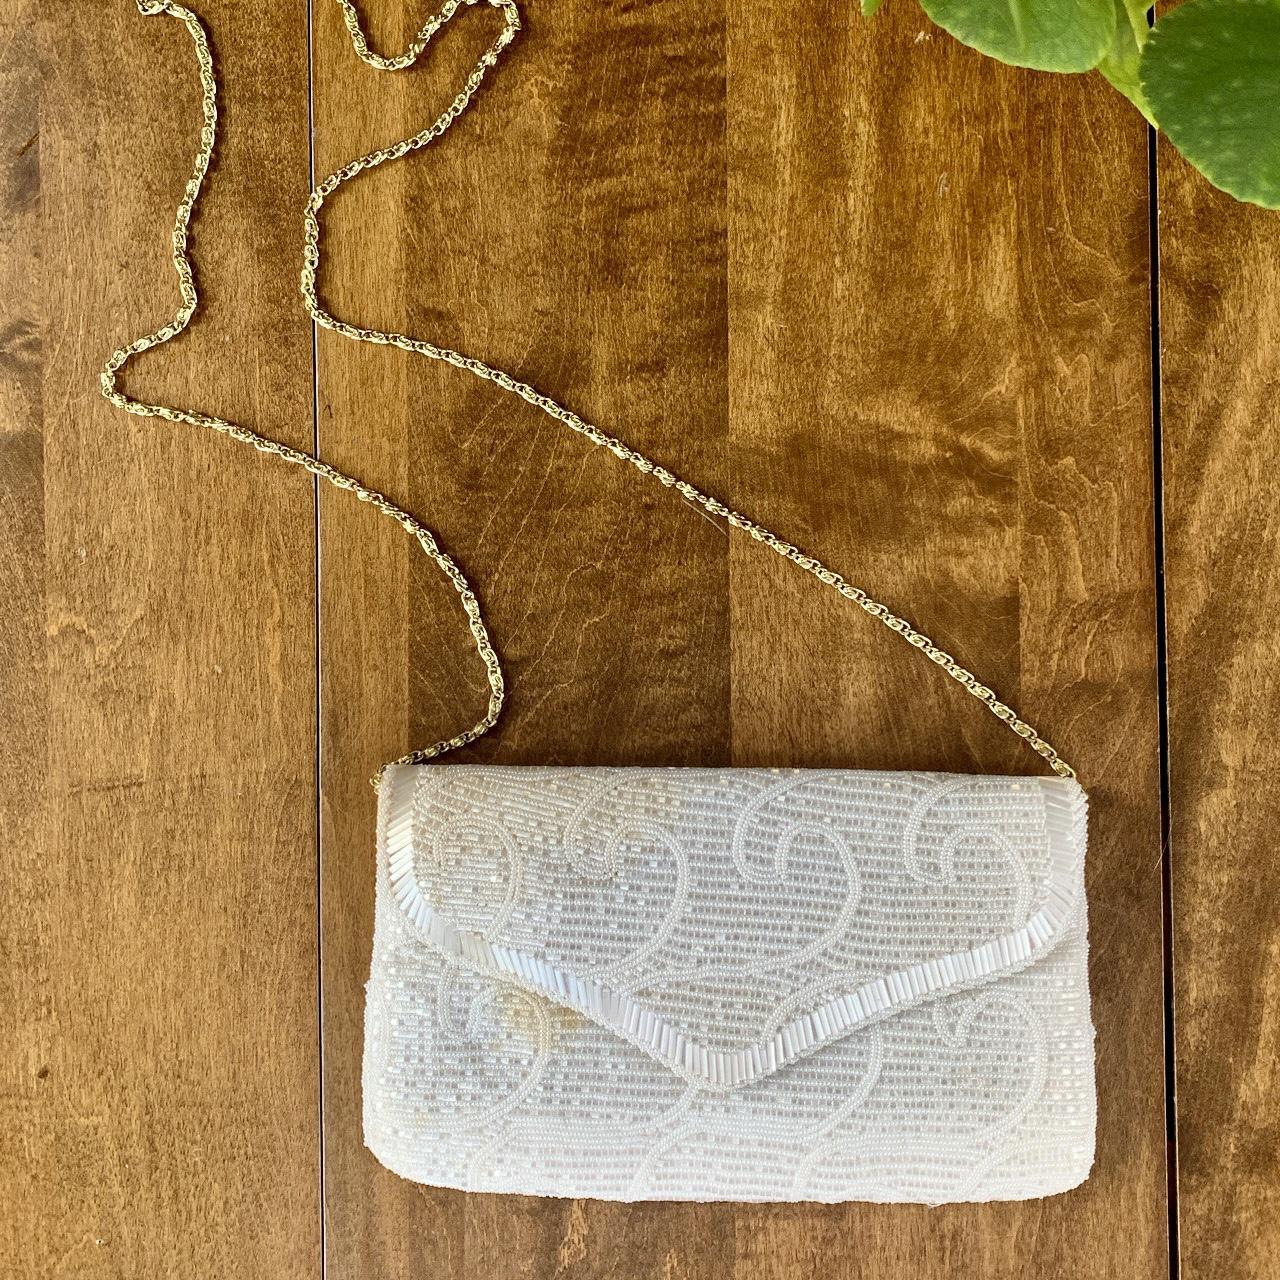 Vintage 70's/80's White Beaded Purse with Gold Chain by La Regale